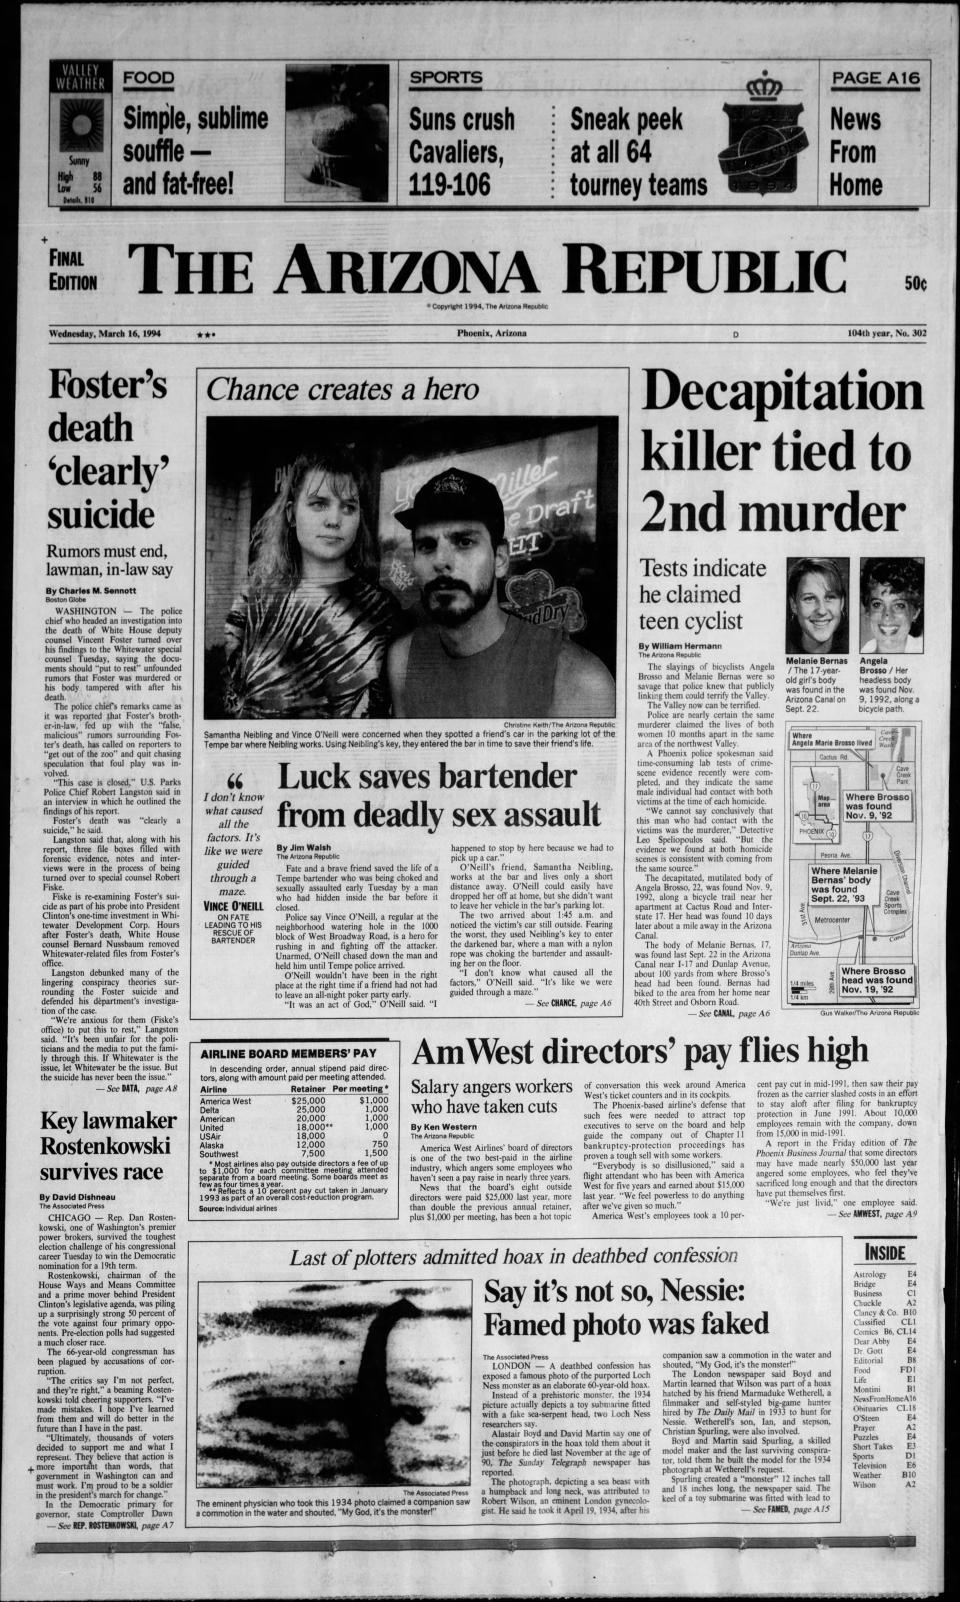 The front page of The Arizona Republic on March 16, 1994.